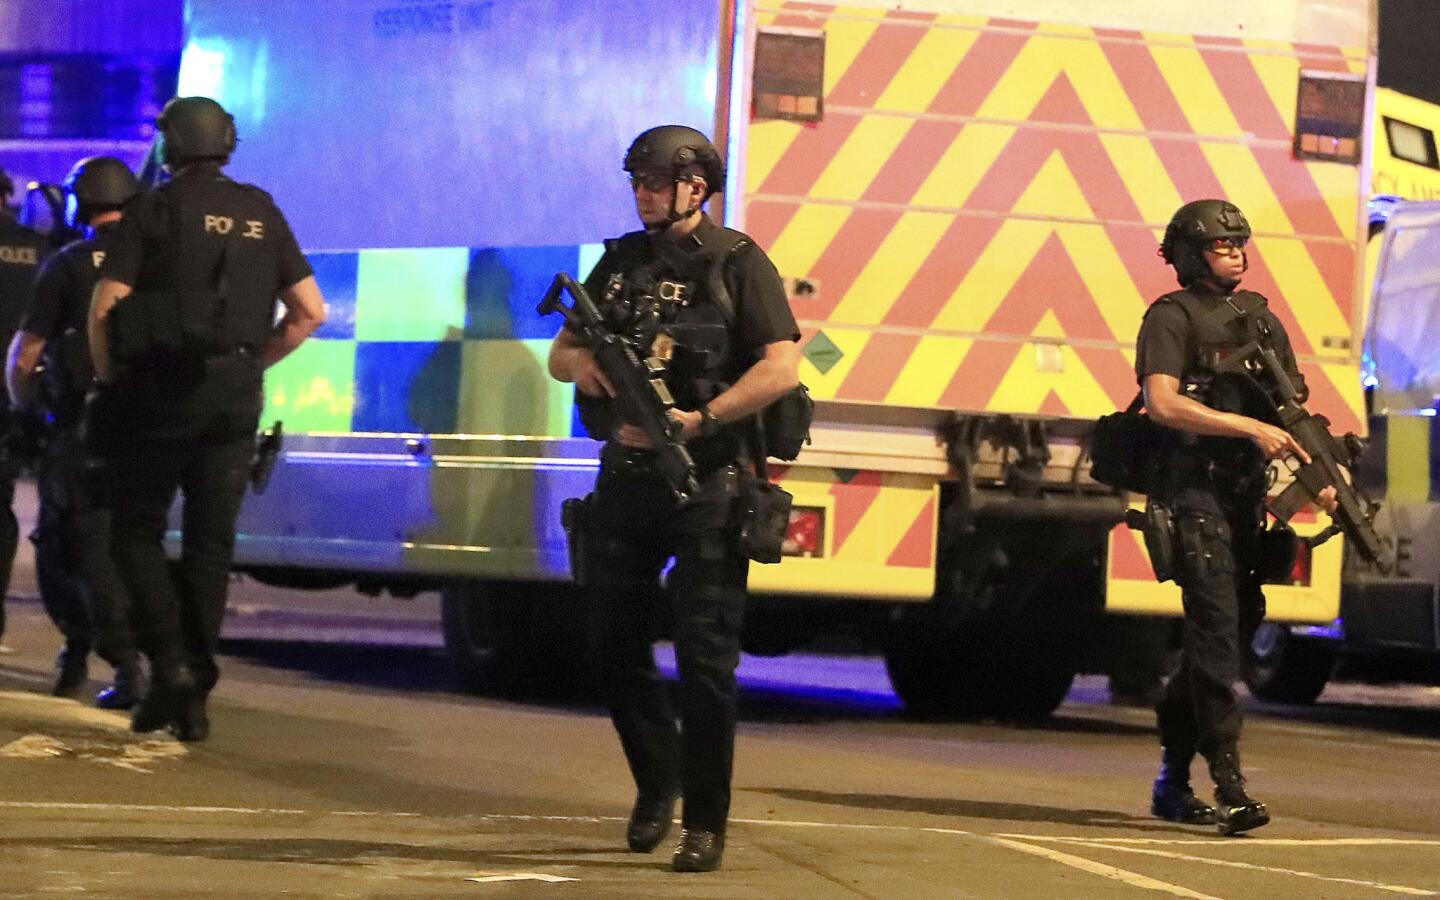 Armed police respond after reports of an explosion at Manchester Arena during an Ariana Grande concert in Manchester, England, Monday, May 22, 2017. Several people have died following reports of an explosion Monday night at the concert in northern England, police said. A representative said the singer was not injured.